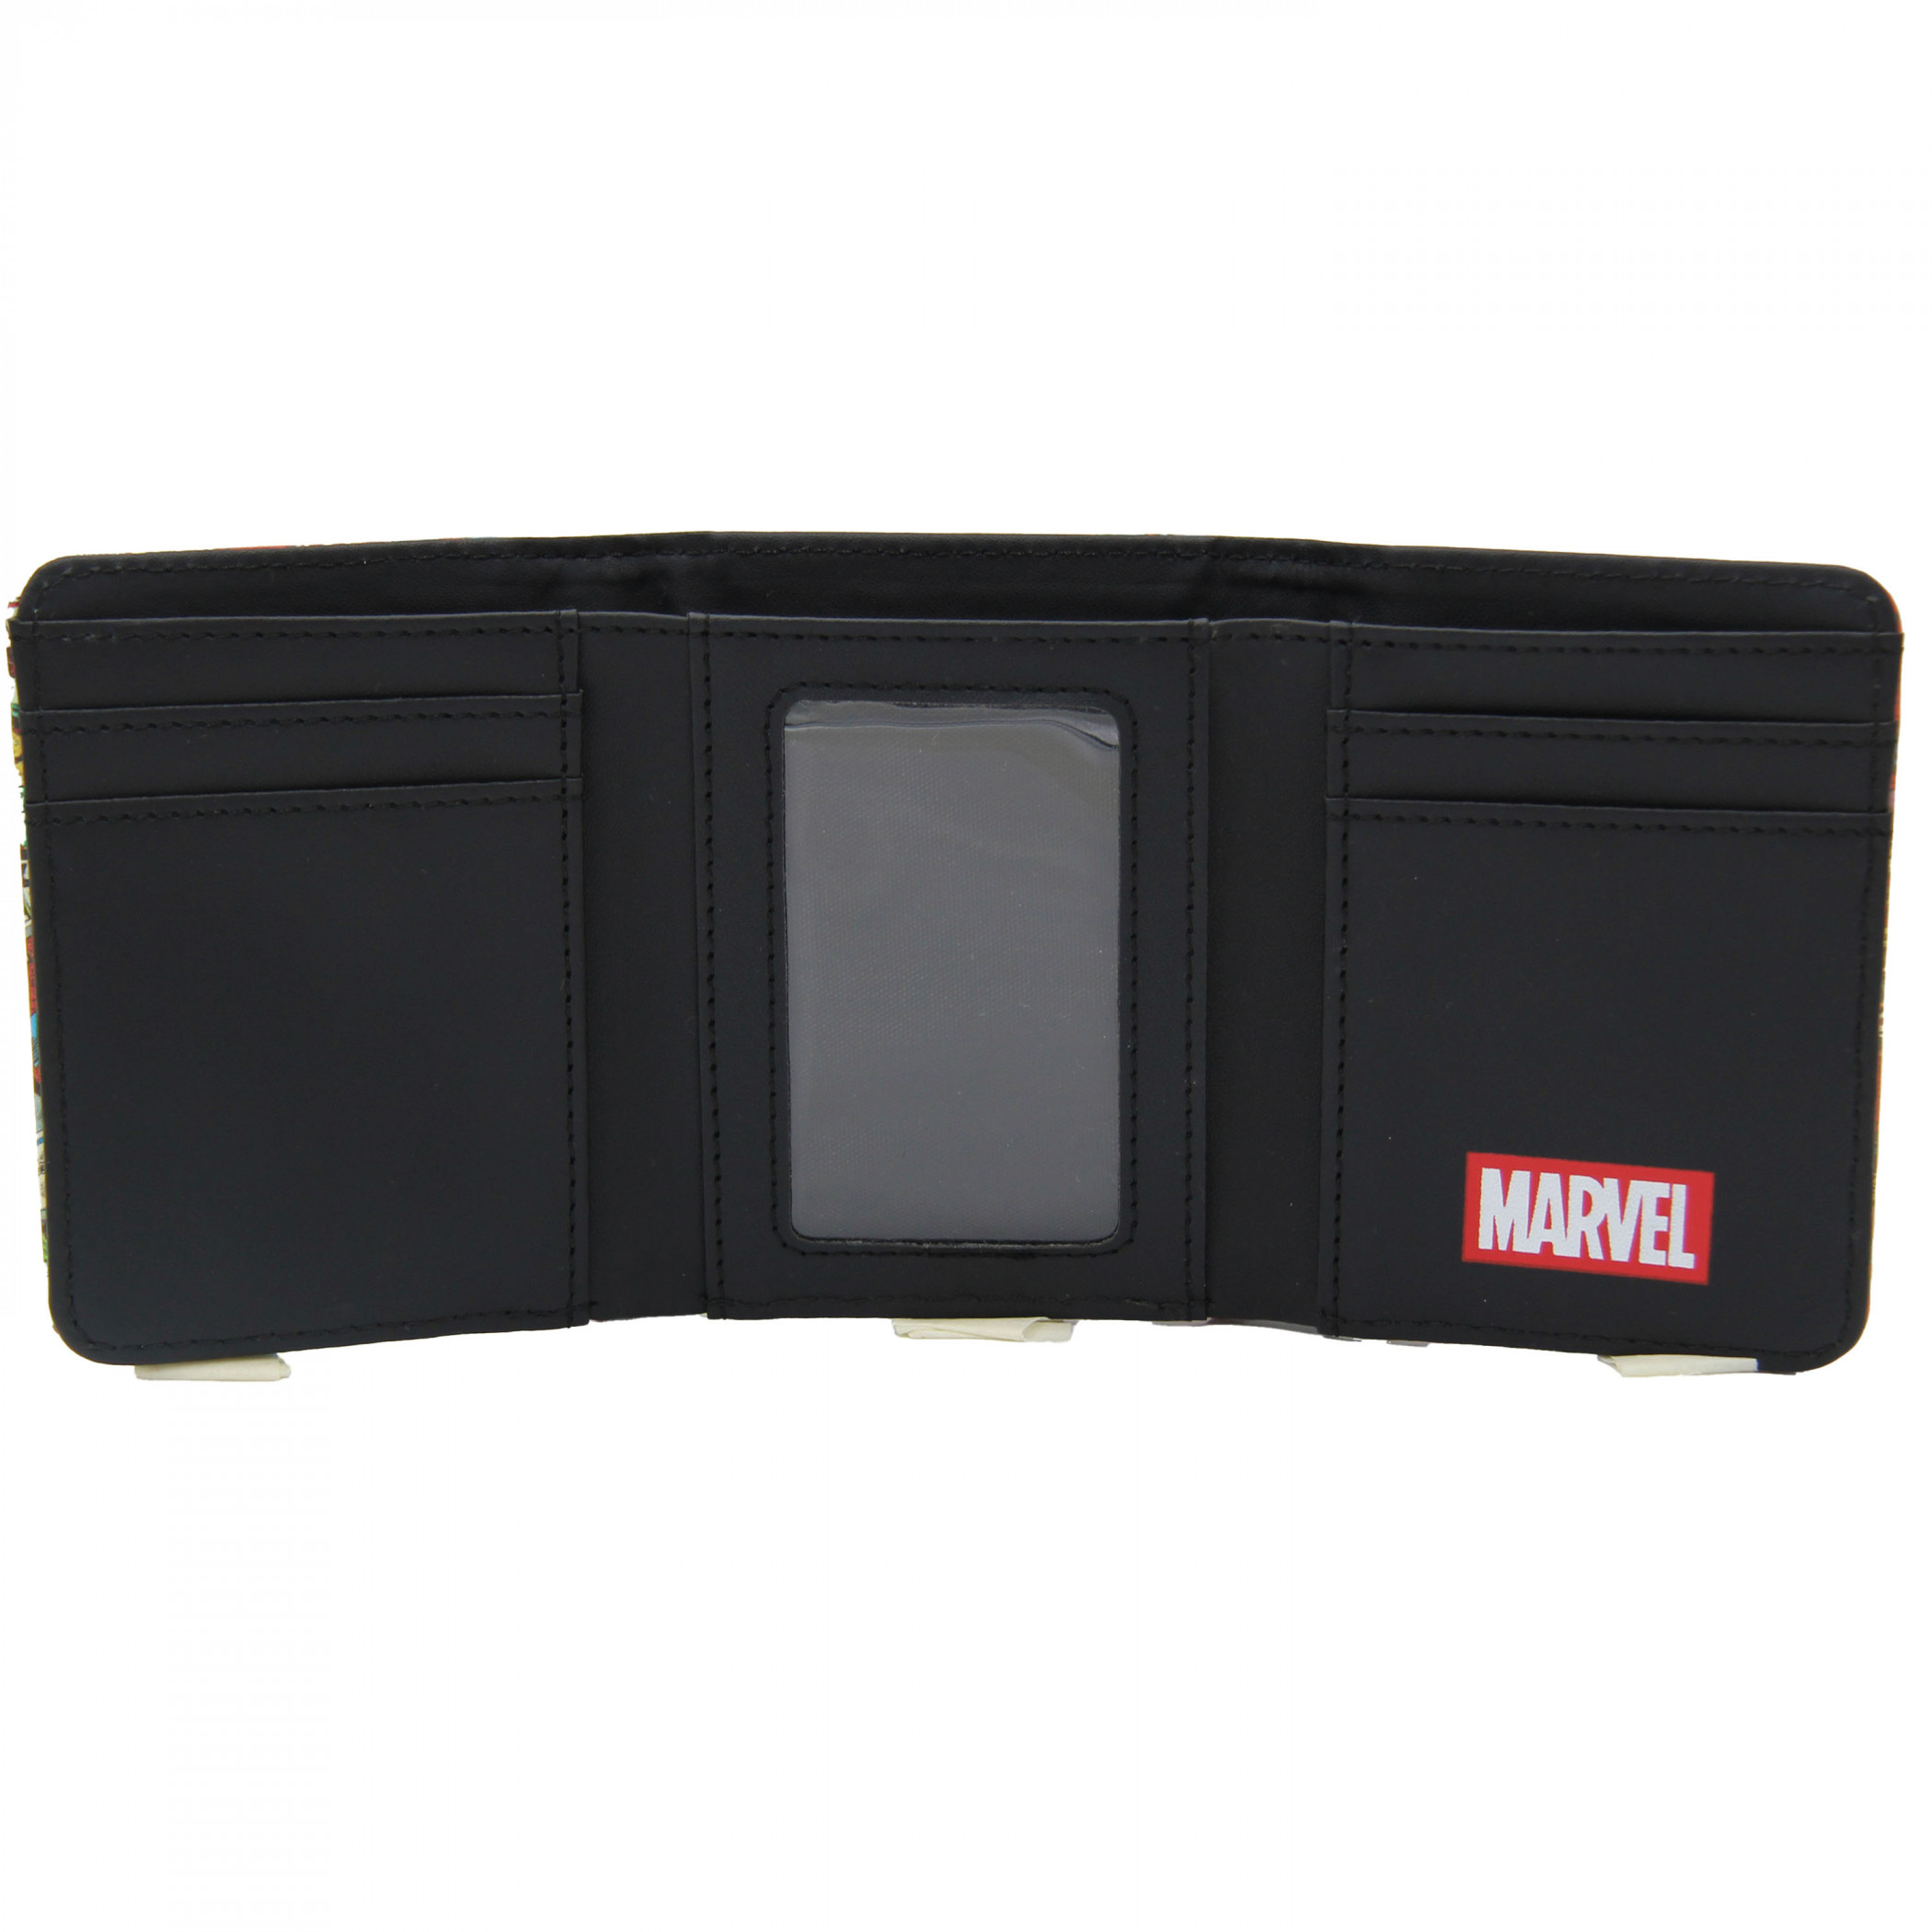 The Amazing Spider-Man Action Panels Trifold Wallet